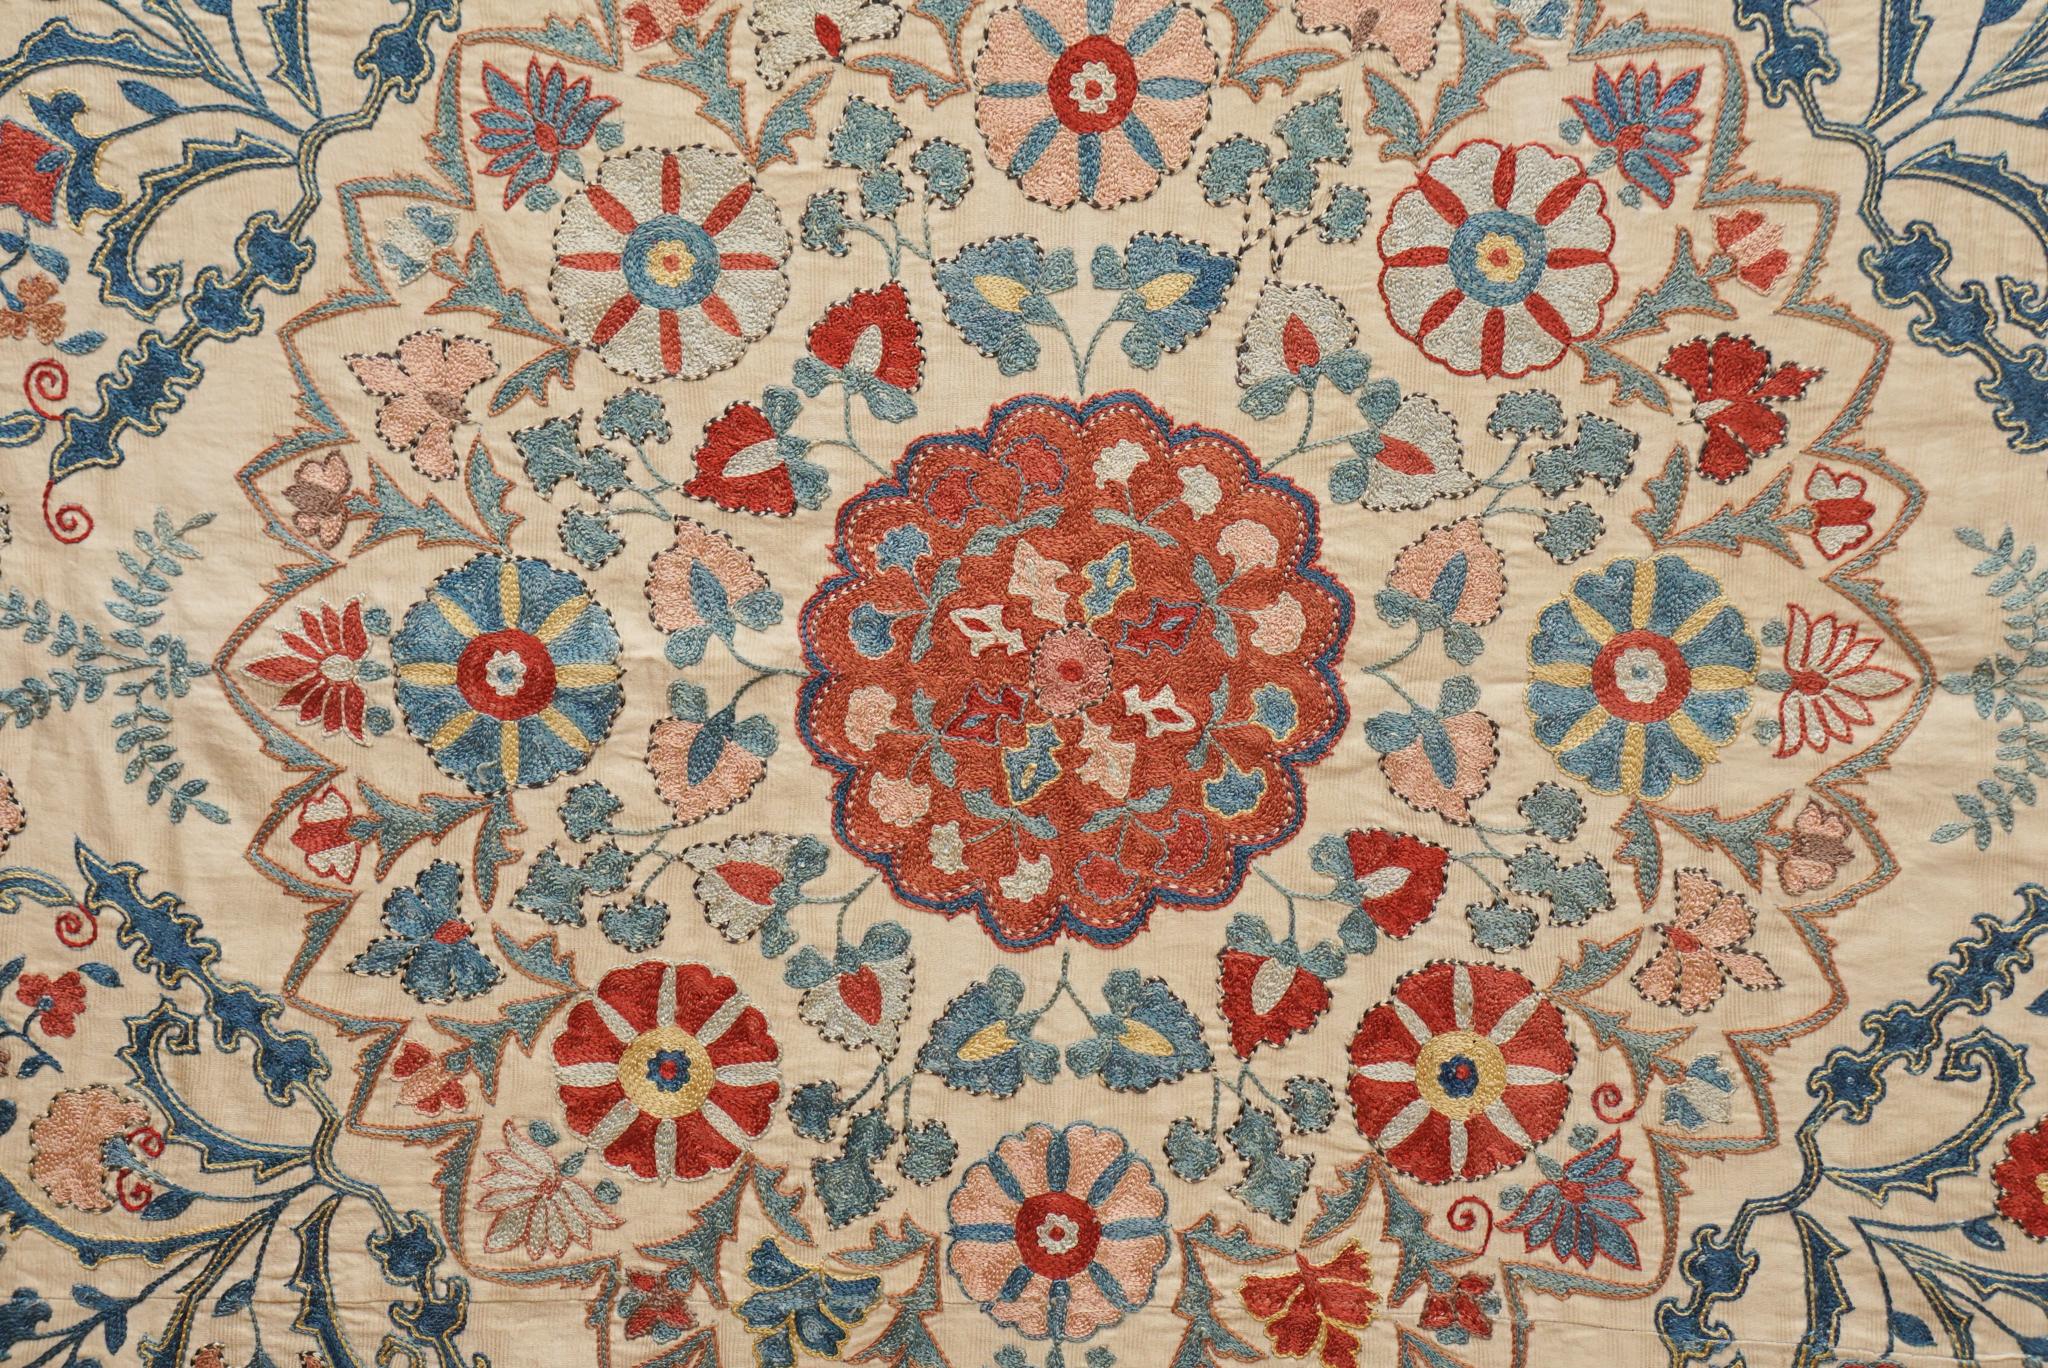 Originating from nomadic tribes in Tajikistan, Uzbekistan, and Kazakhstan, Suzanis, like the one shown here, are known for their intricate embroidery, rich coloration and elaborate design motifs.  This Suzani, possibly late 18th / early 19th